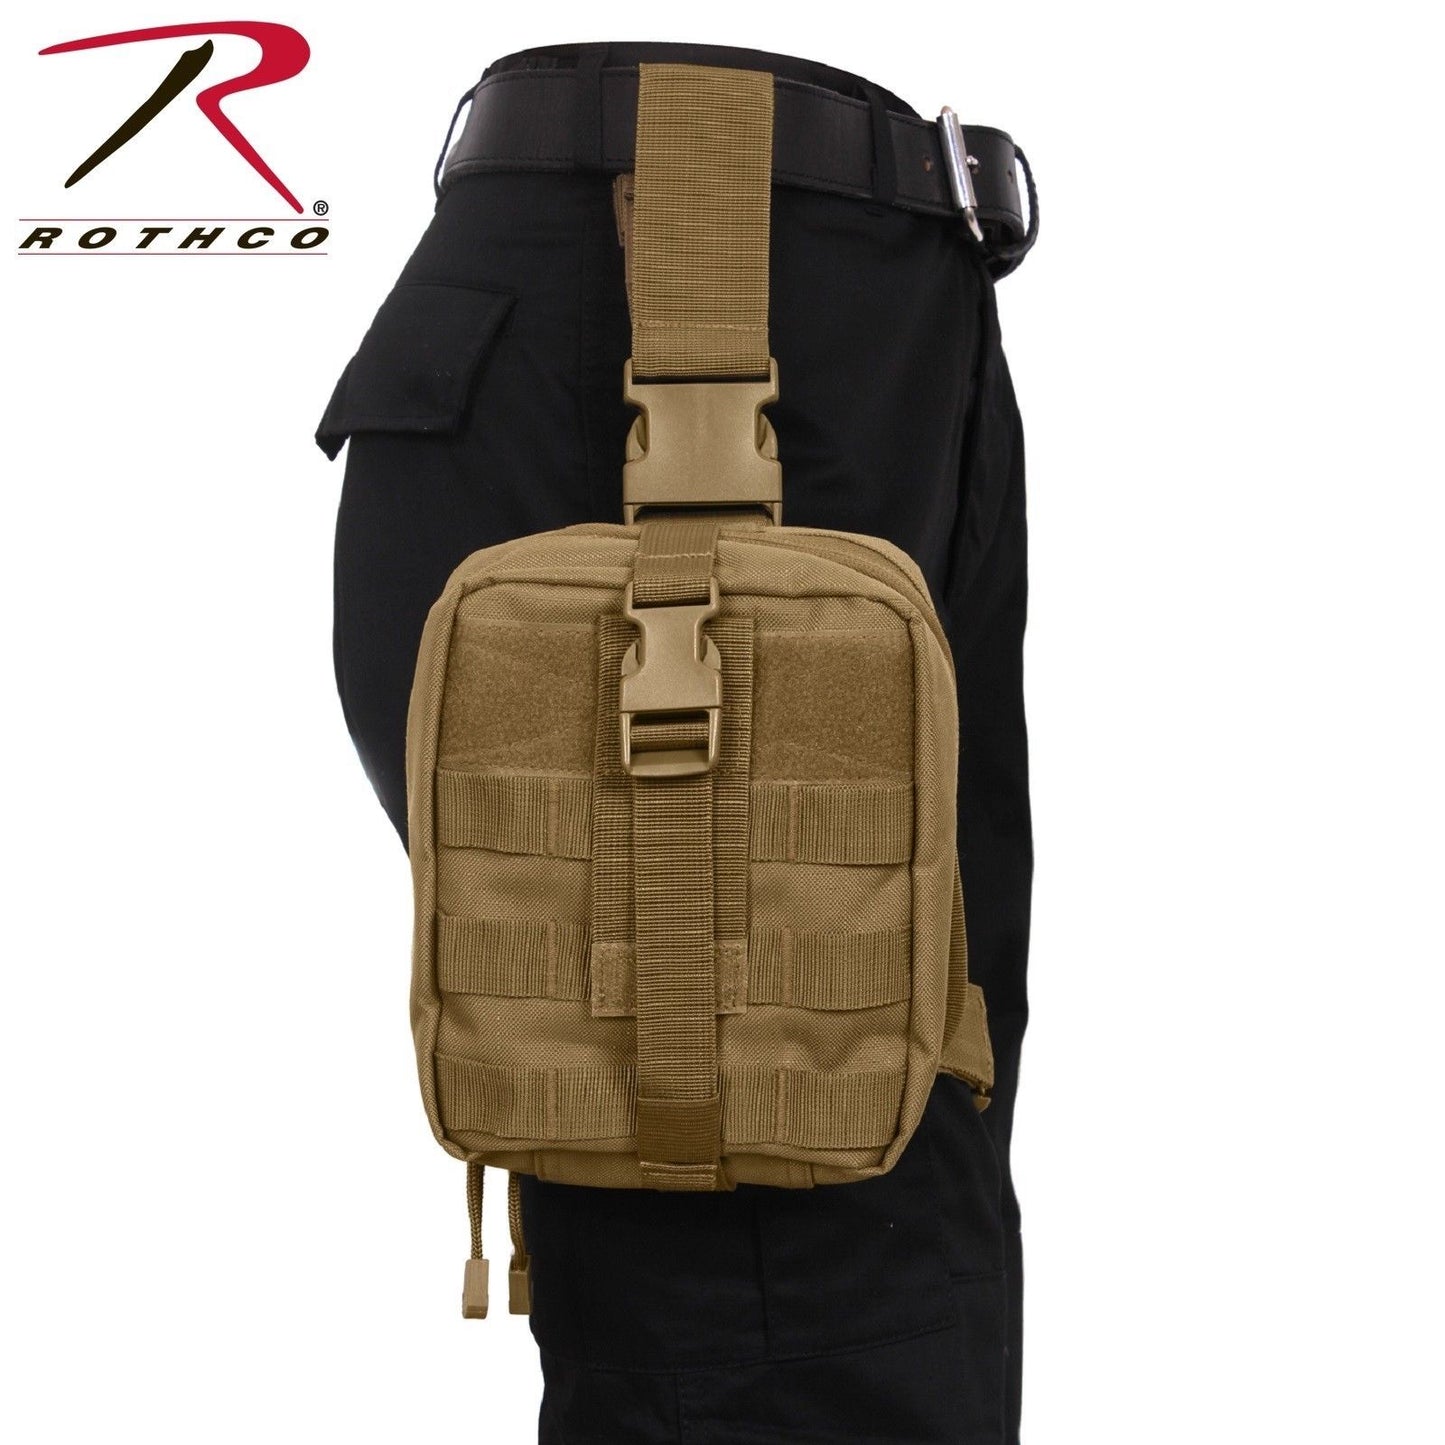 Rothco Drop Leg Medical Pouch - Coyote Brown Holstered Tactical MOLLE Medic Bag